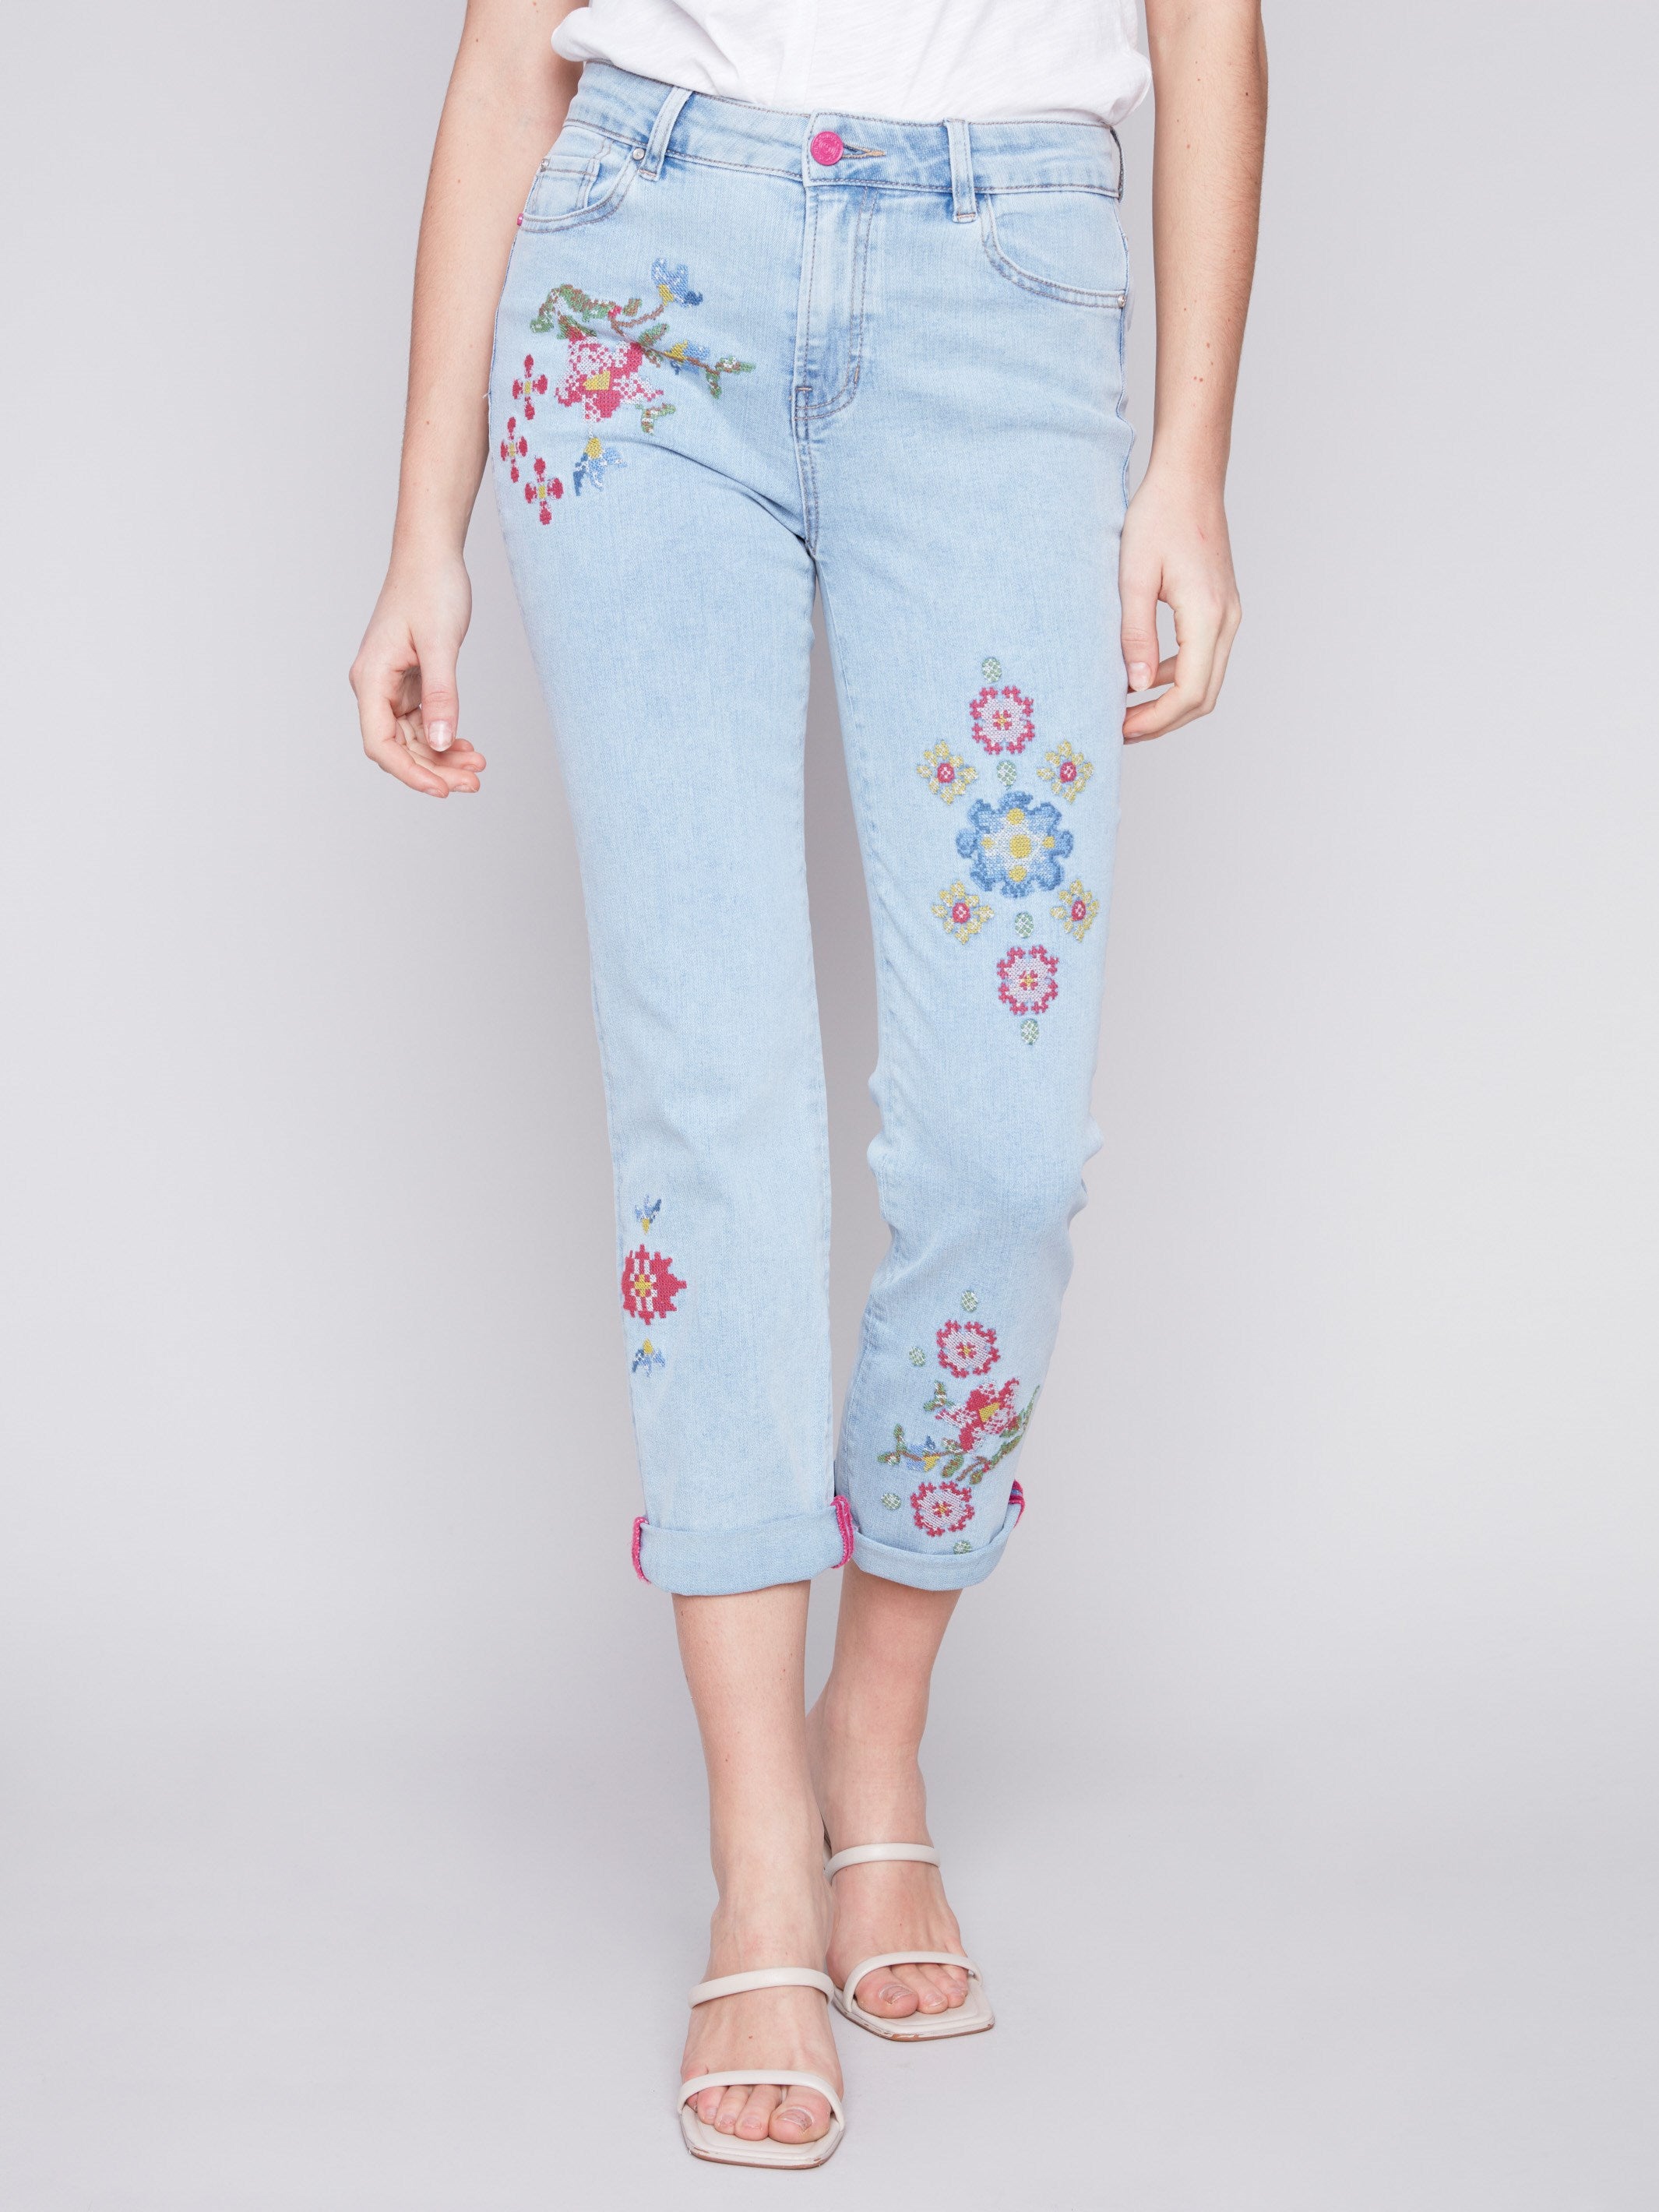 Cross Stitch Embroidered Jeans - Bleach Blue - Charlie B Collection Canada - Image 2